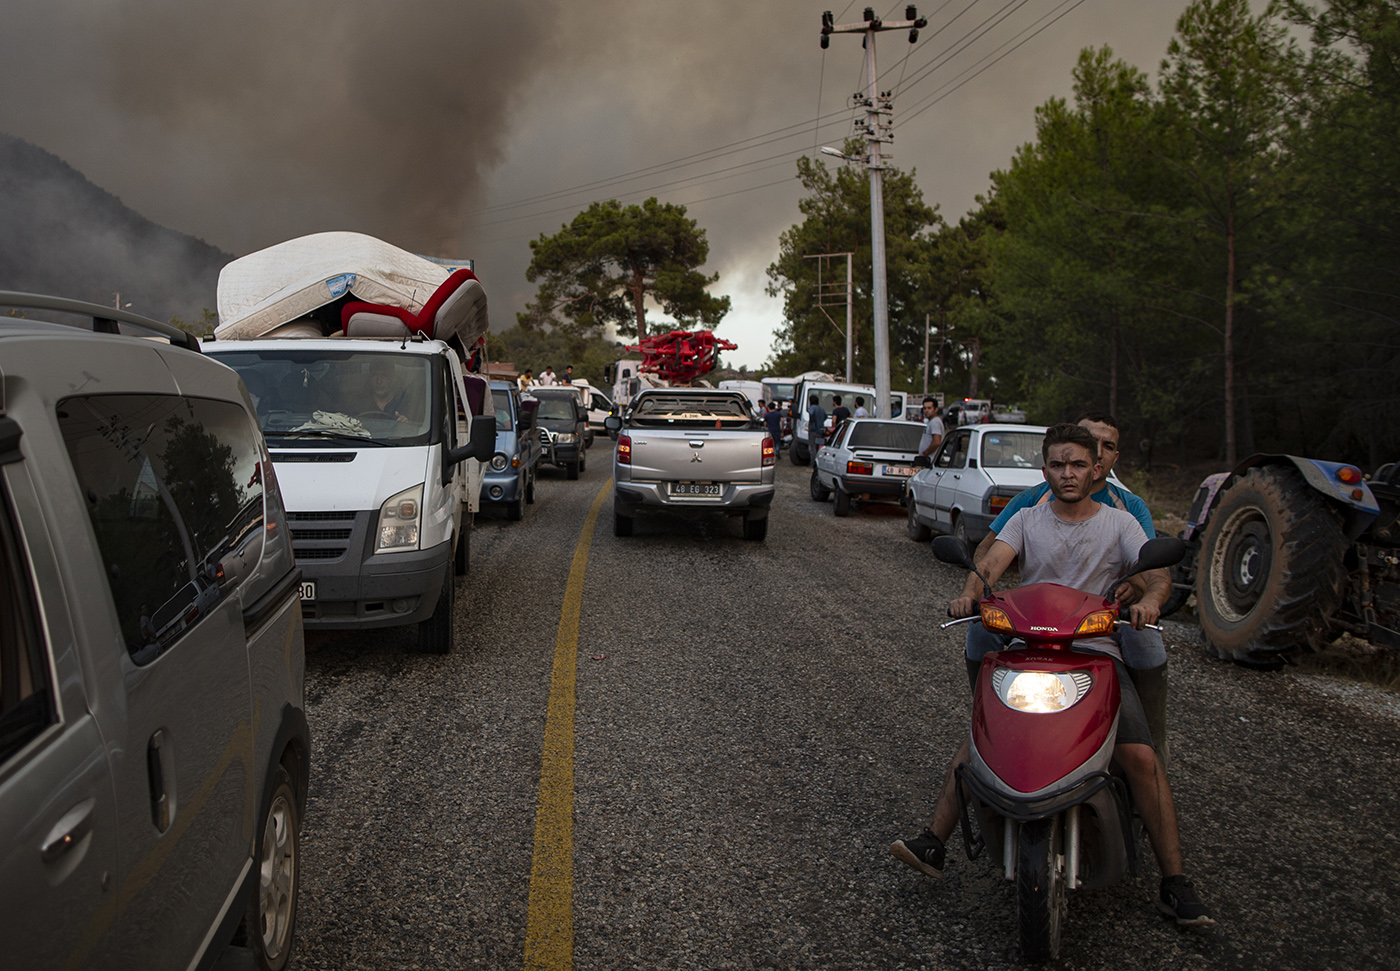 People leave from their home during the wildfires at the  Yuvarlakcay village of the Koycegiz district of Mugla, Turkey, 03 August 2021. Turkish Health minister Fahrettin Koca confirmed that eight people have lost their lives due to the wildfires raging in Turkey’s Mediterranean towns.